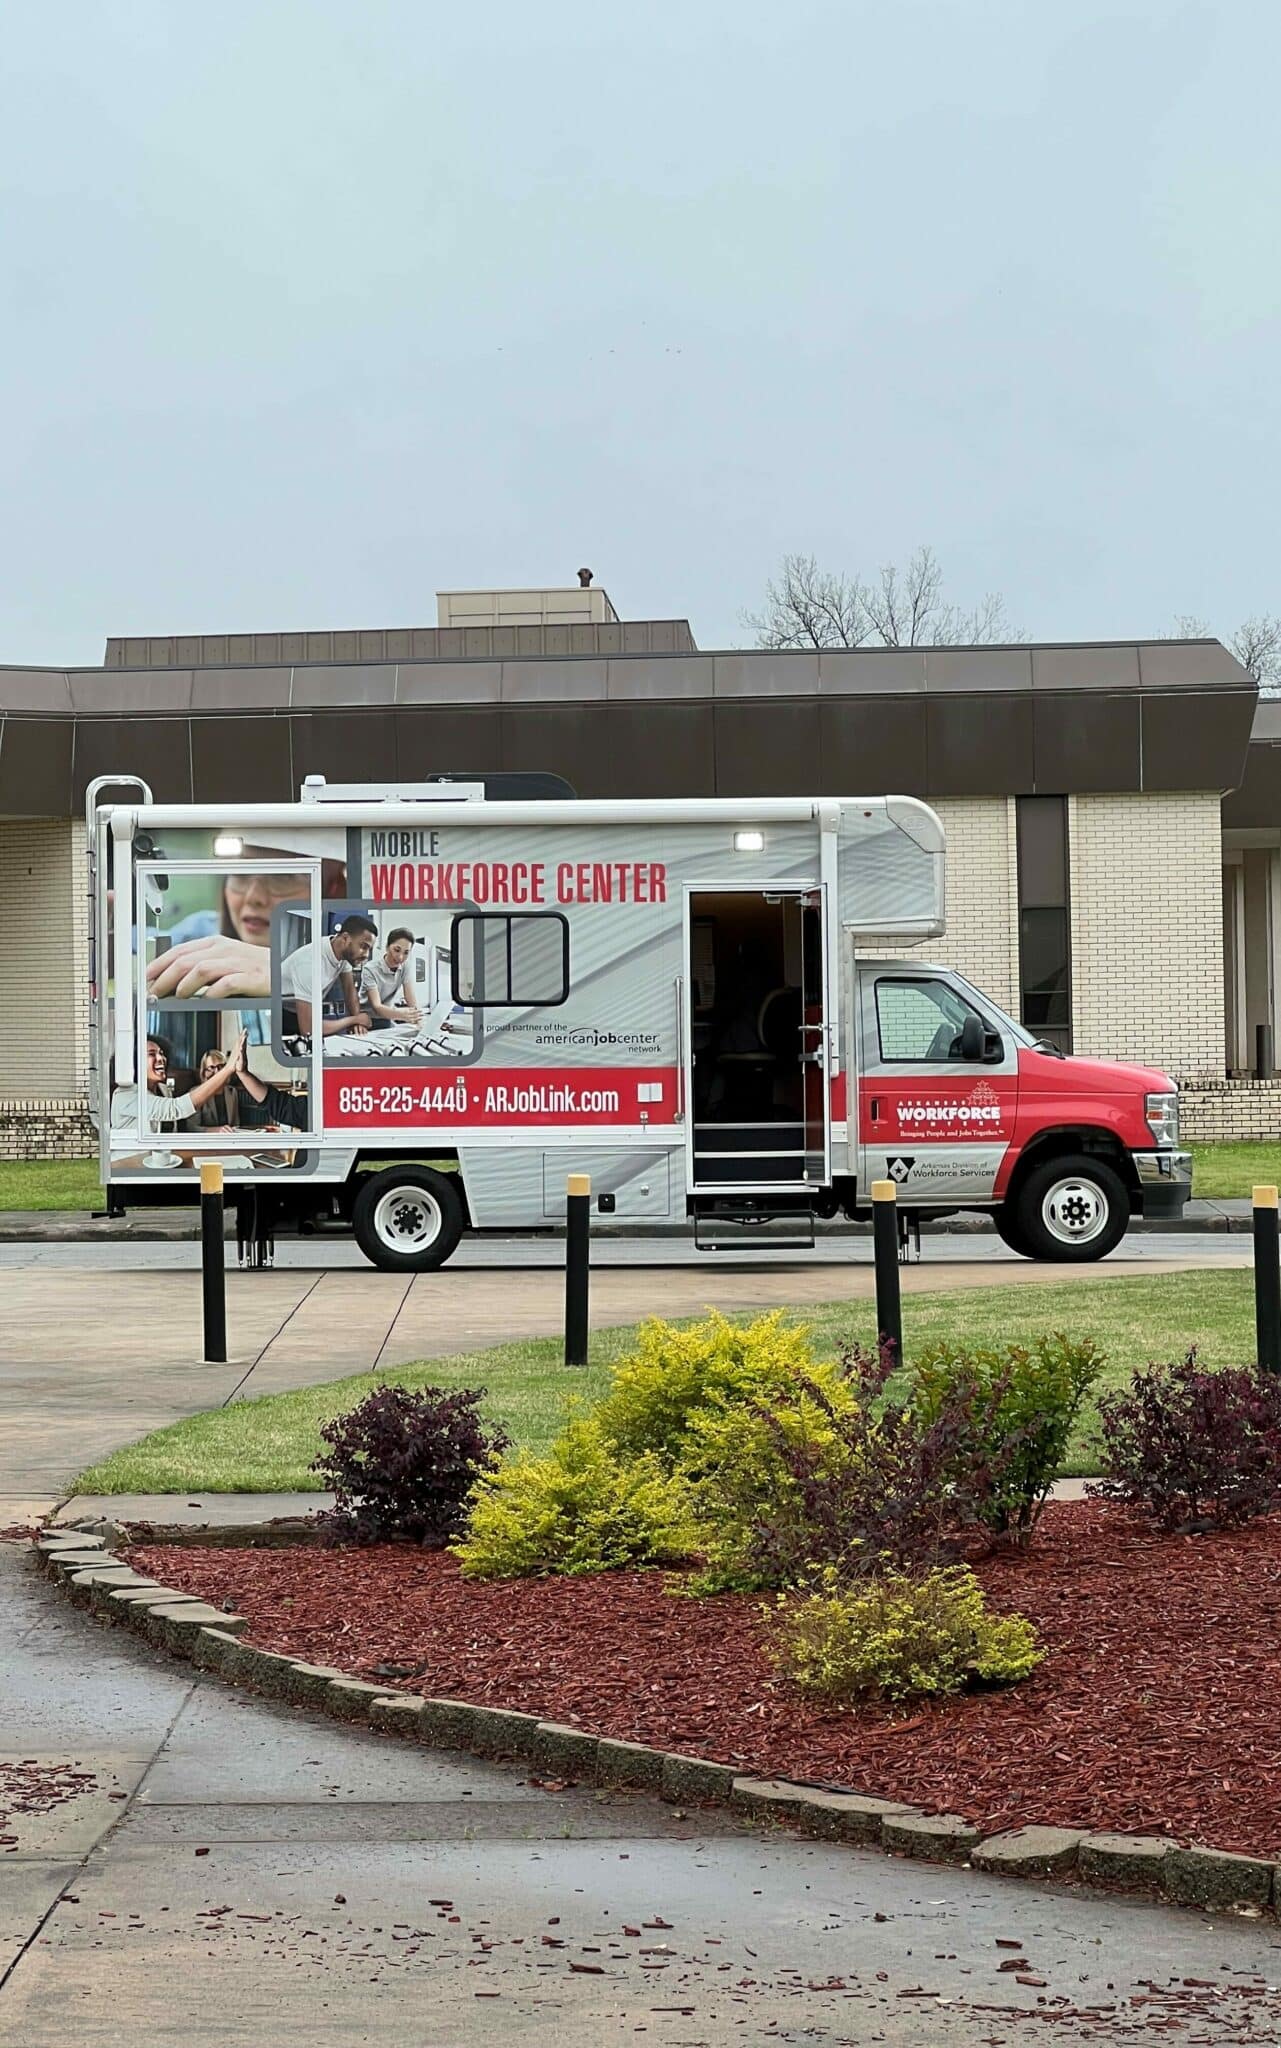 Small mobile workforce center vehicle parked in front of a building